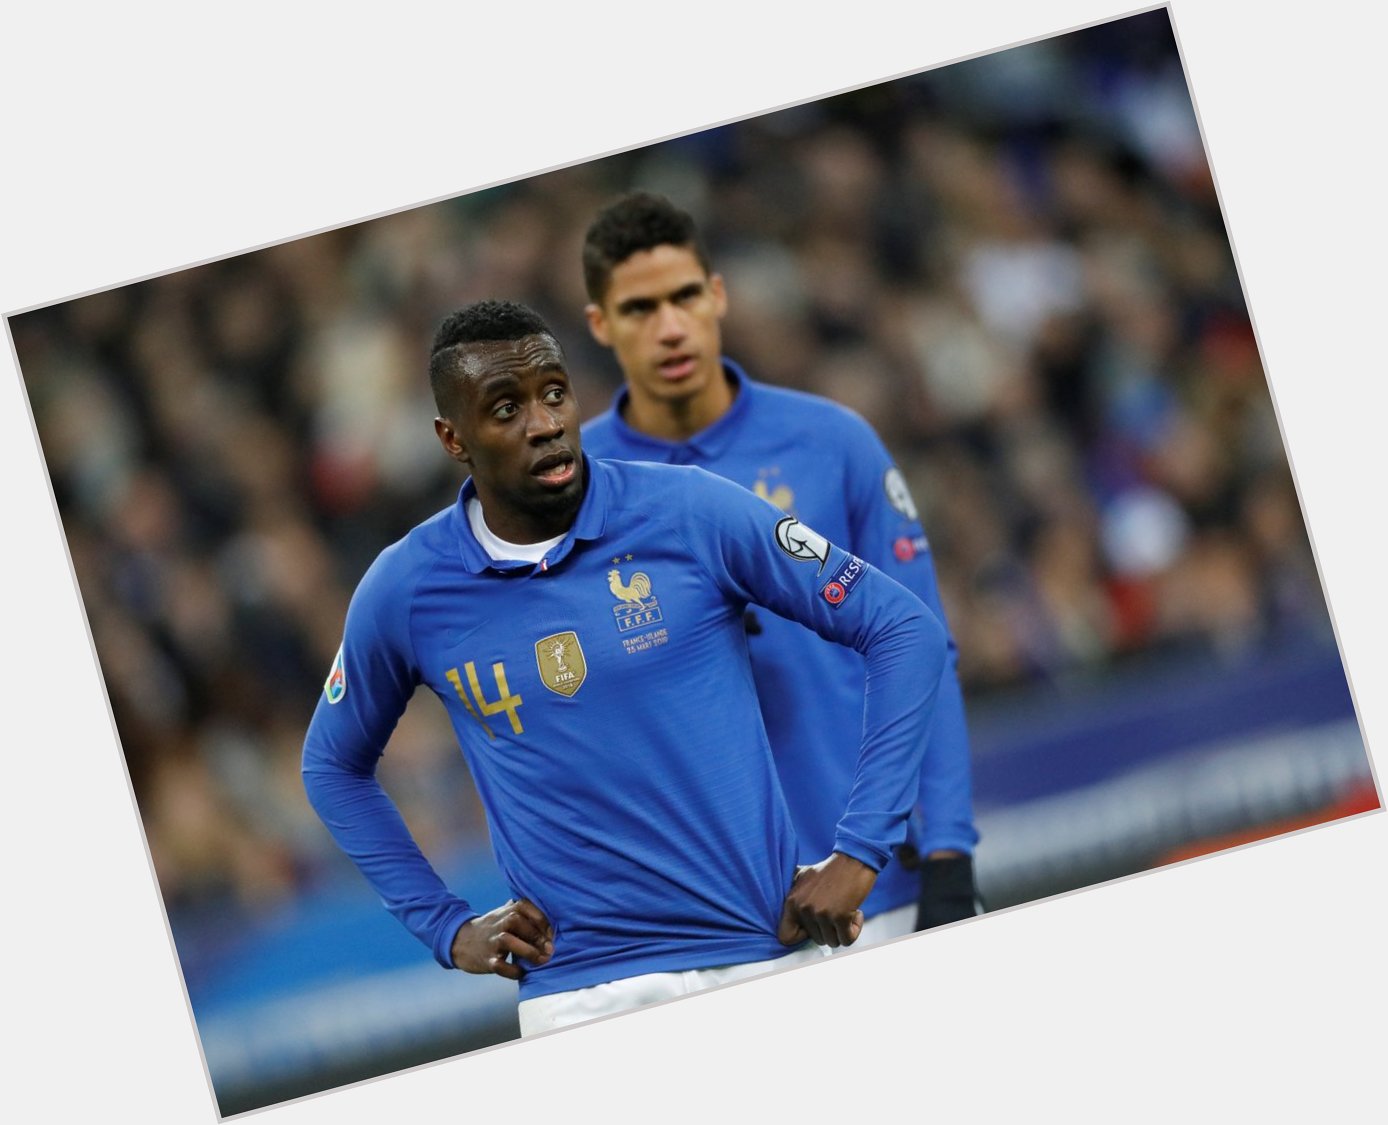 Happy Birthday to Blaise Matuidi!

The Juve midfielder was the answer to our Who Am I? question on Monday! 